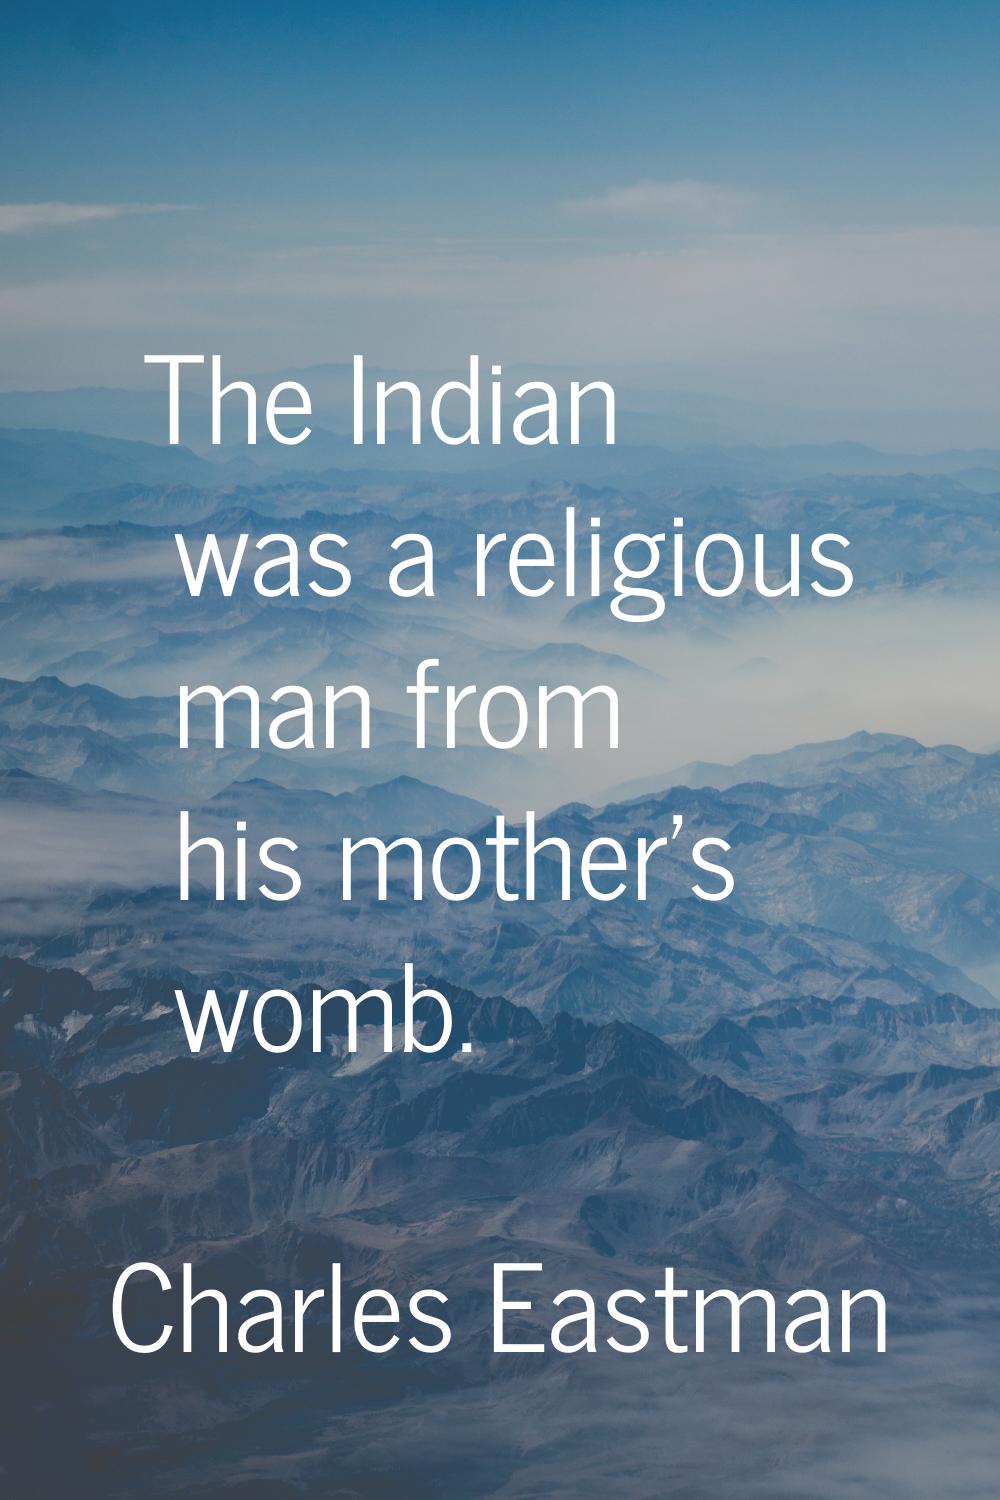 The Indian was a religious man from his mother's womb.